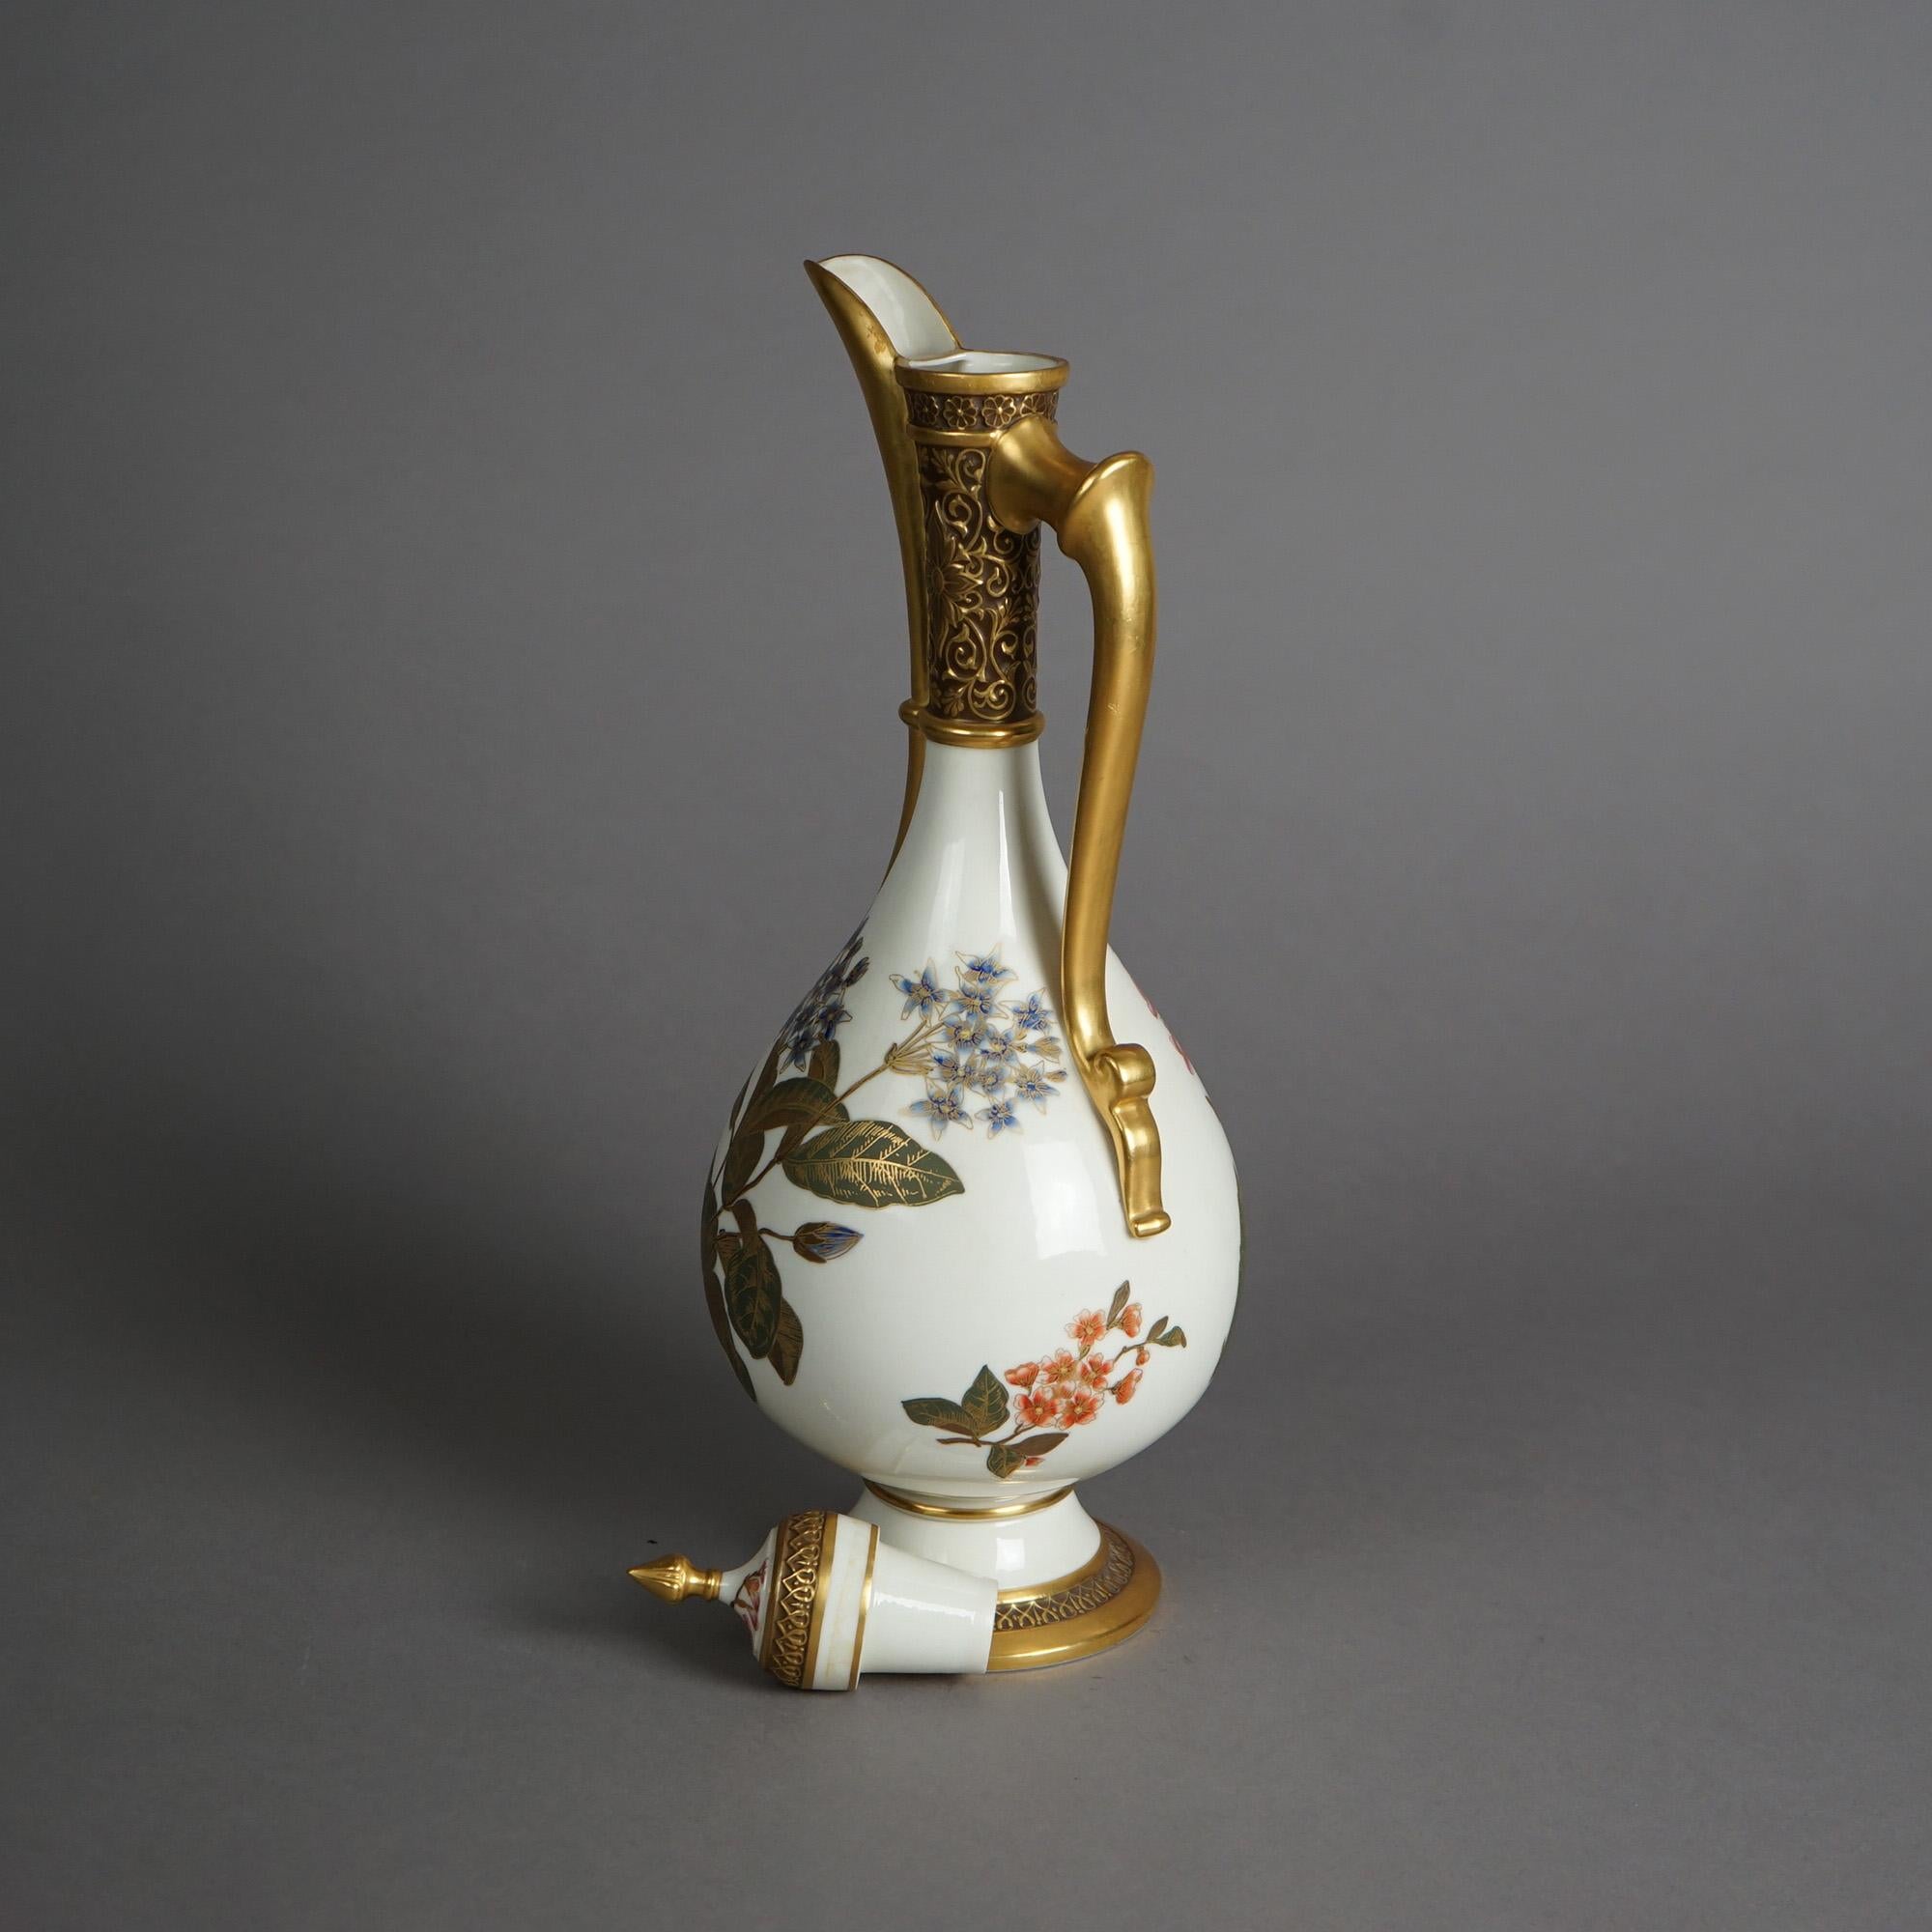 Antique Royal Worcester Hand Painted, Gilt Egyptian Revival Porcelain Ewer c1900 In Good Condition For Sale In Big Flats, NY